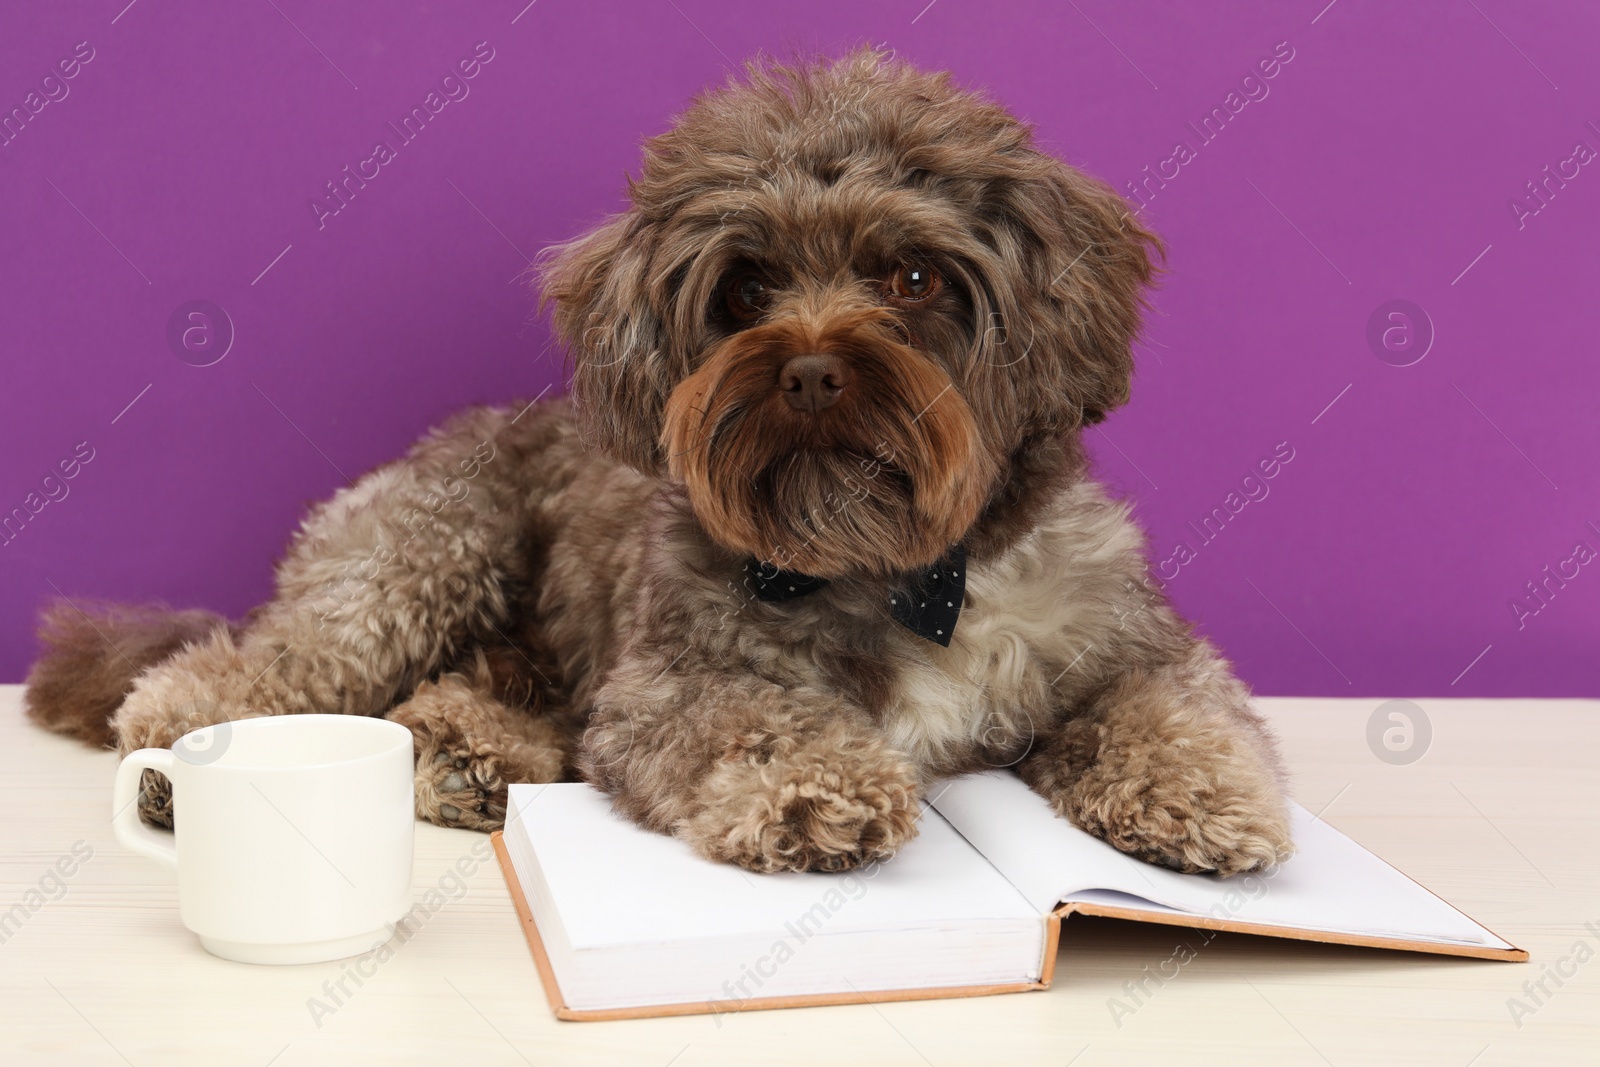 Photo of Cute Maltipoo dog with book and cup on white table against violet background. Lovely pet